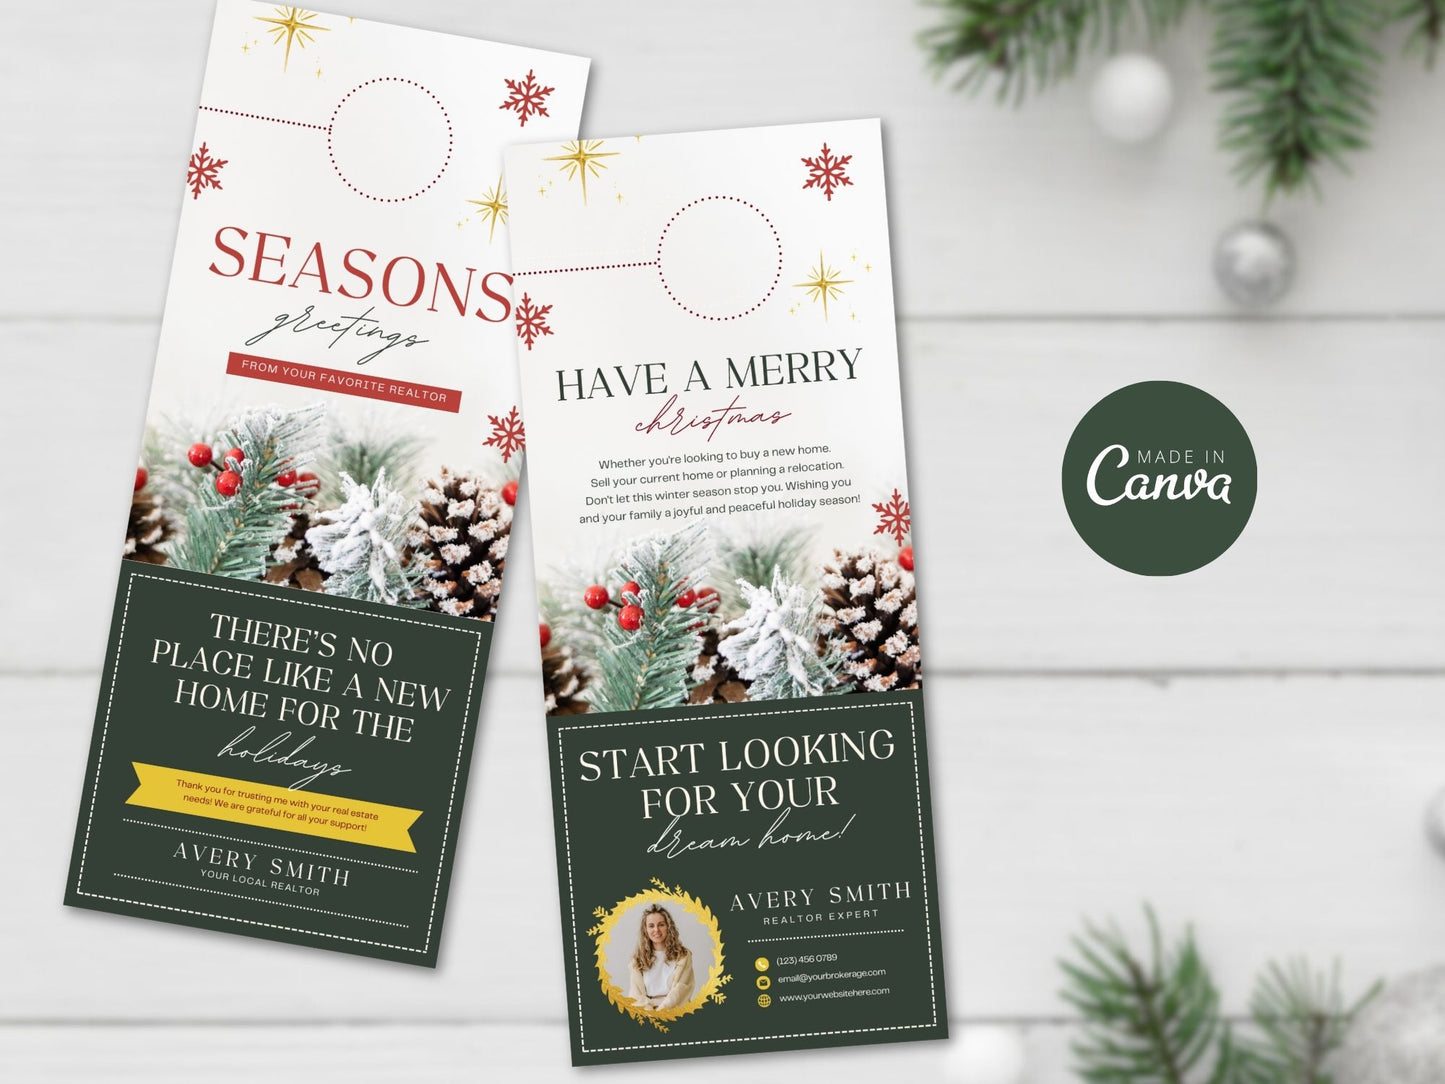 Real Estate Seasons Greeting Christmas Door Hanger - Green: Deck the Doors with Festive Holiday Greetings for Clients and the Community